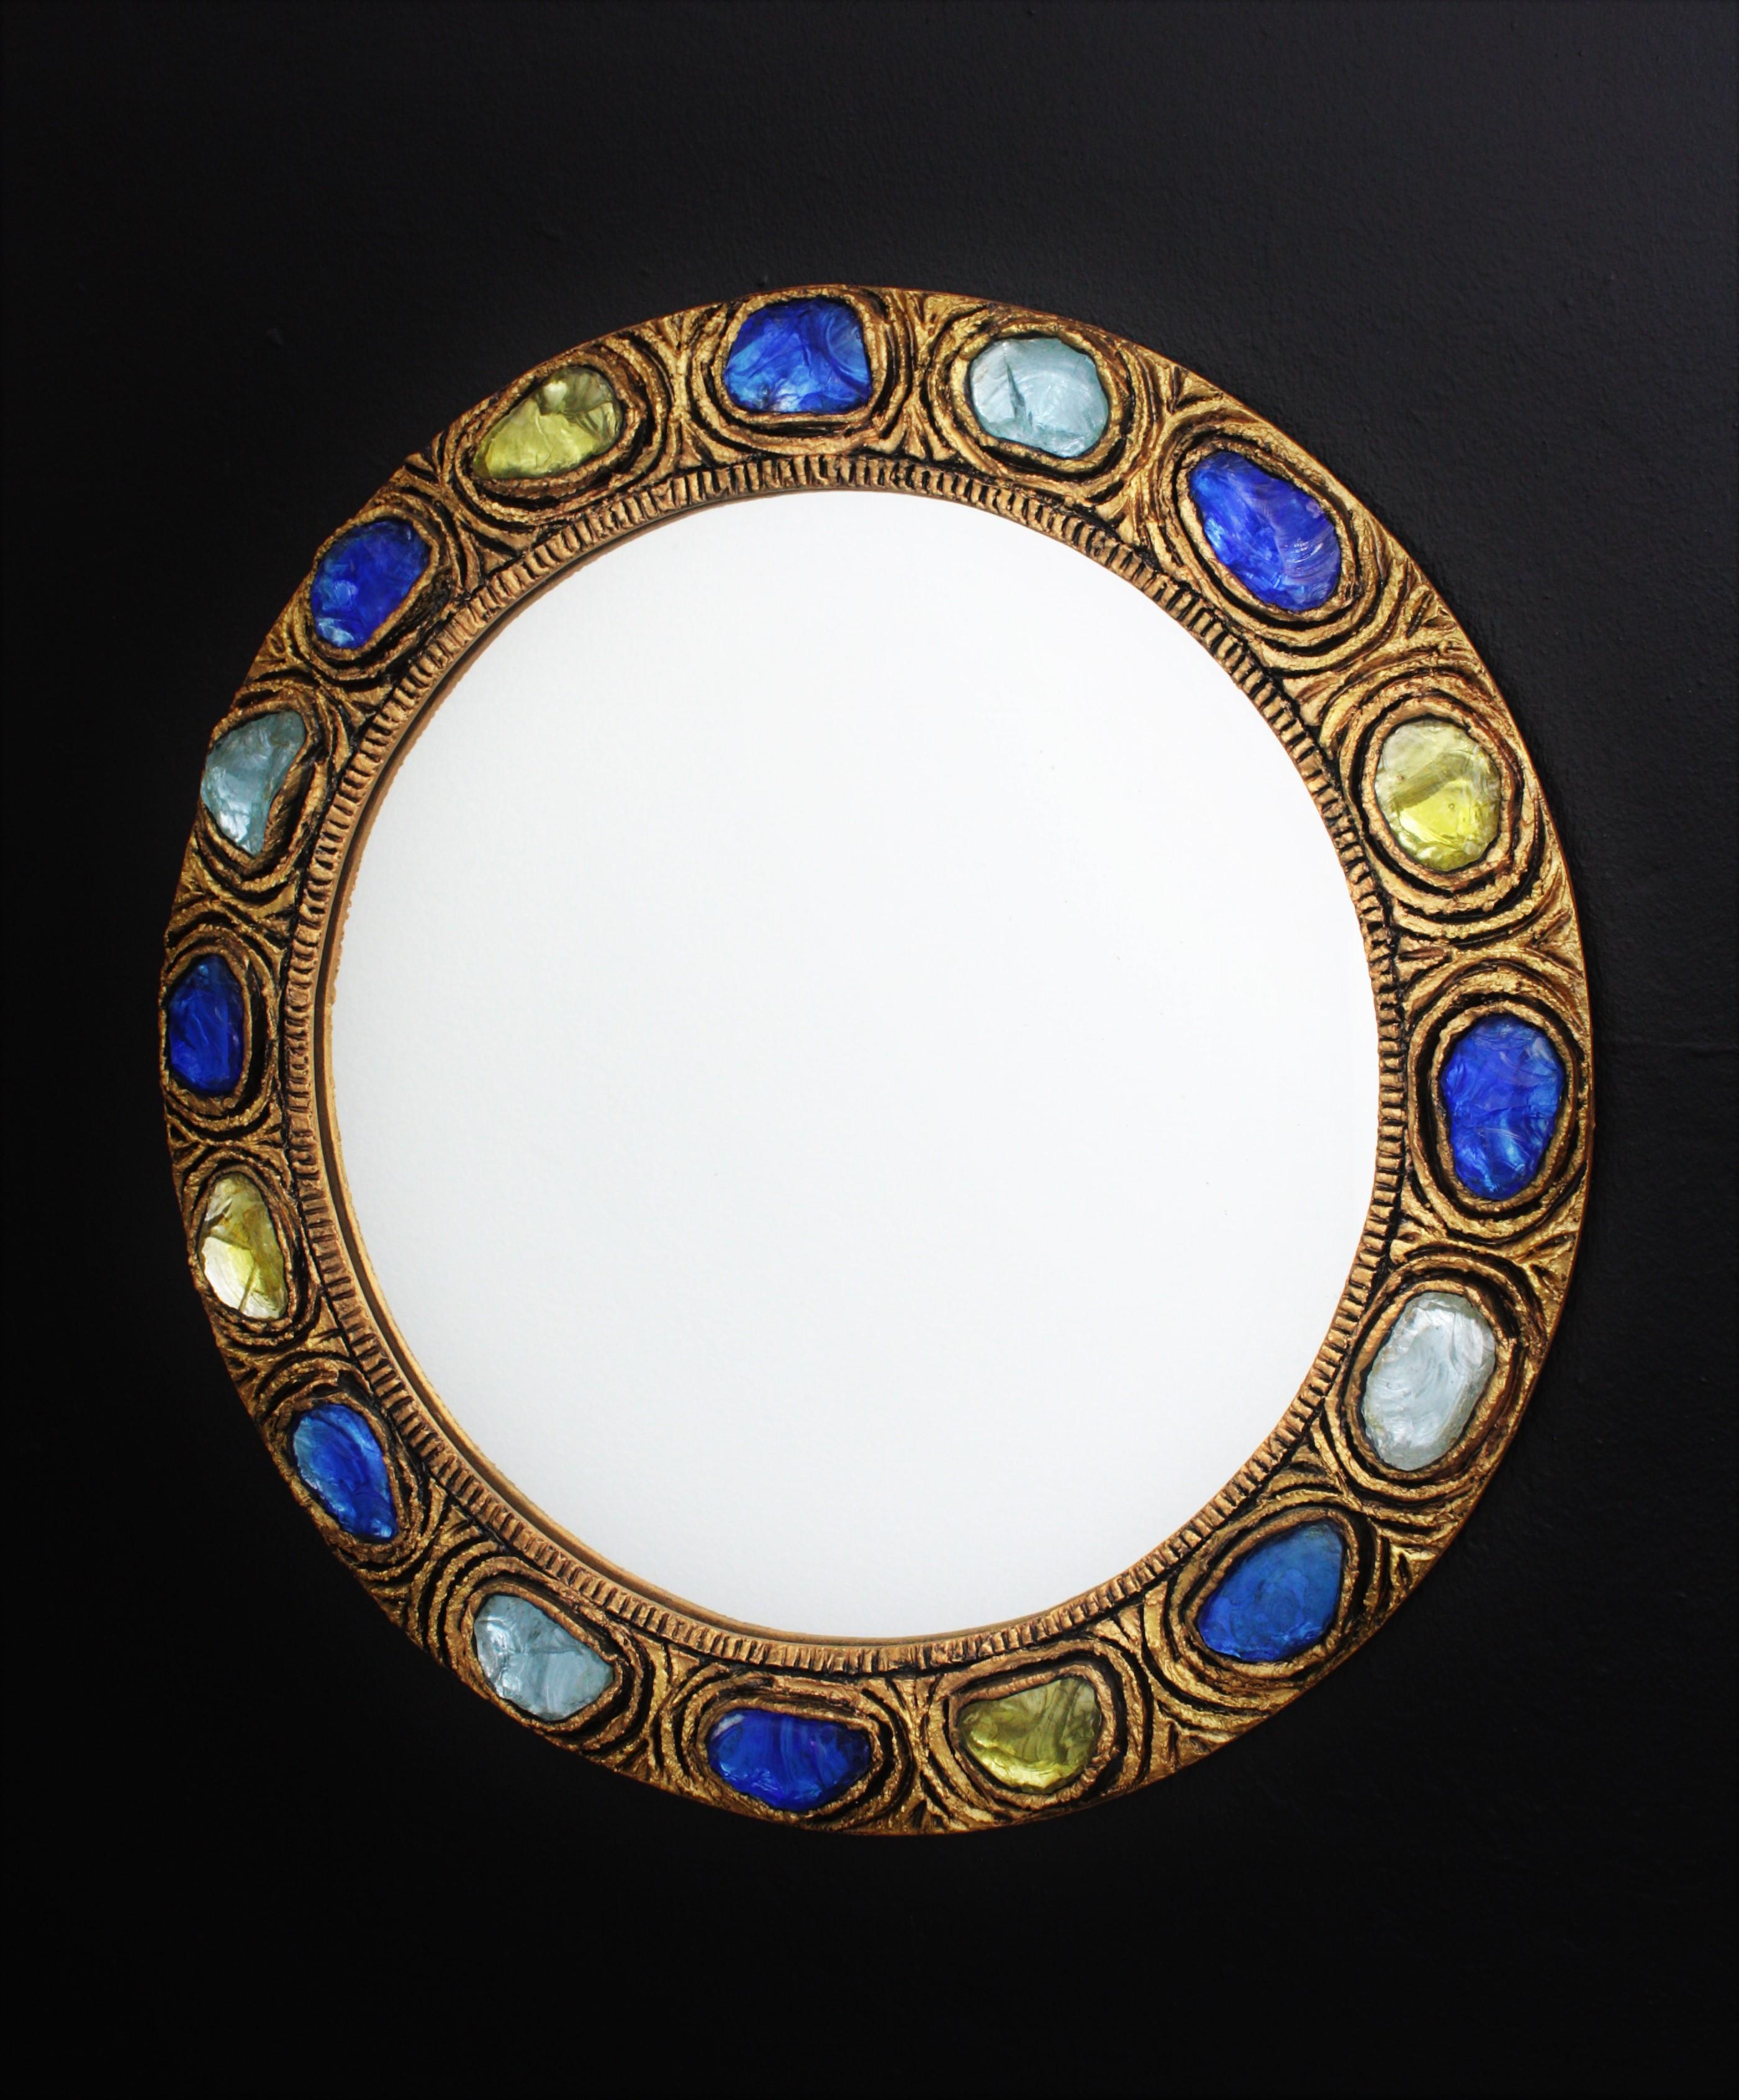 Rare Mid-Century Modern handcrafted circular mirror made of stucco accented with blue / purple and yellow rock crystals. Spain, 1960s.
Beautiful frame made with pieces of colorful rock crystals and gold patinated finish. Lovely to be used as a